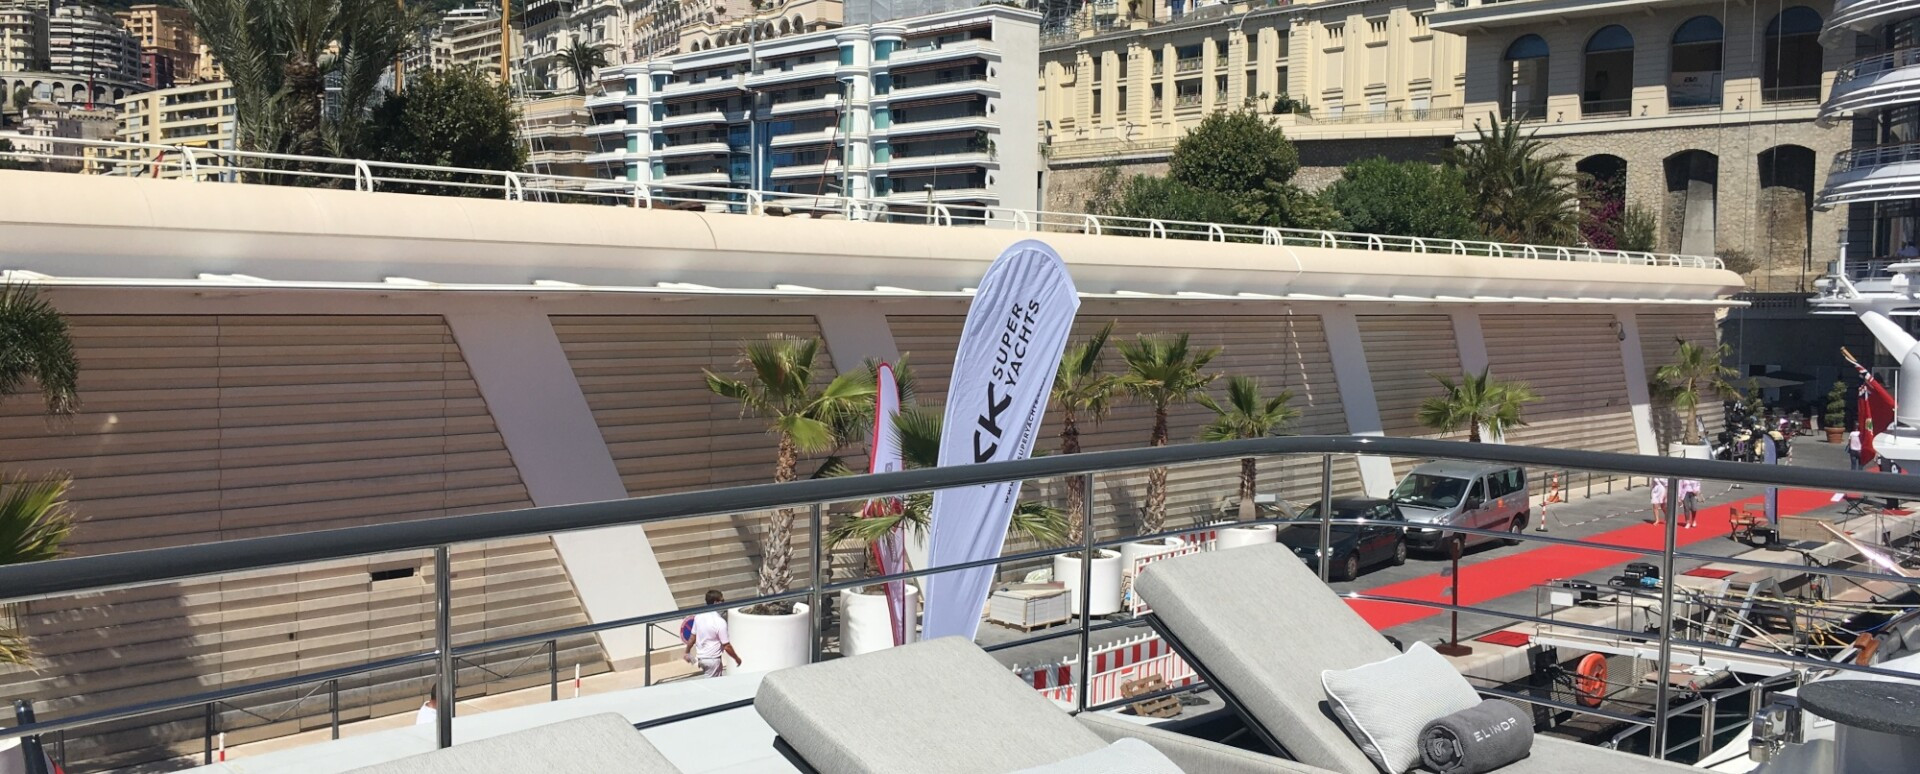                                                                                                     Another Successful Event for the Cluster Yachting Monaco Spring Pop Up!
                                                                                            